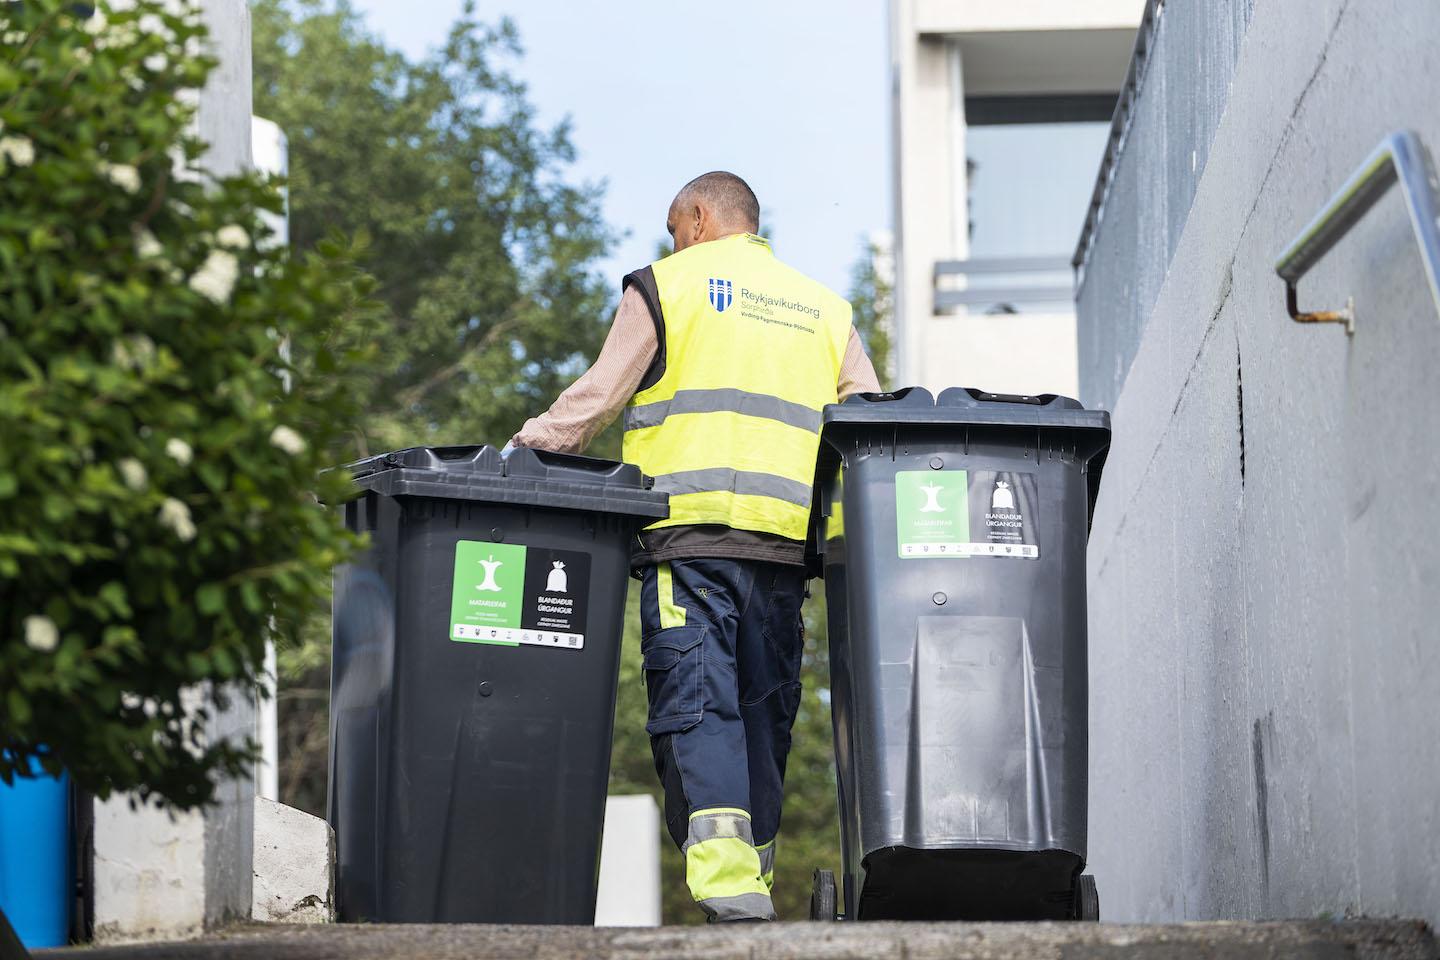 Waste collection worker with two waste bins.